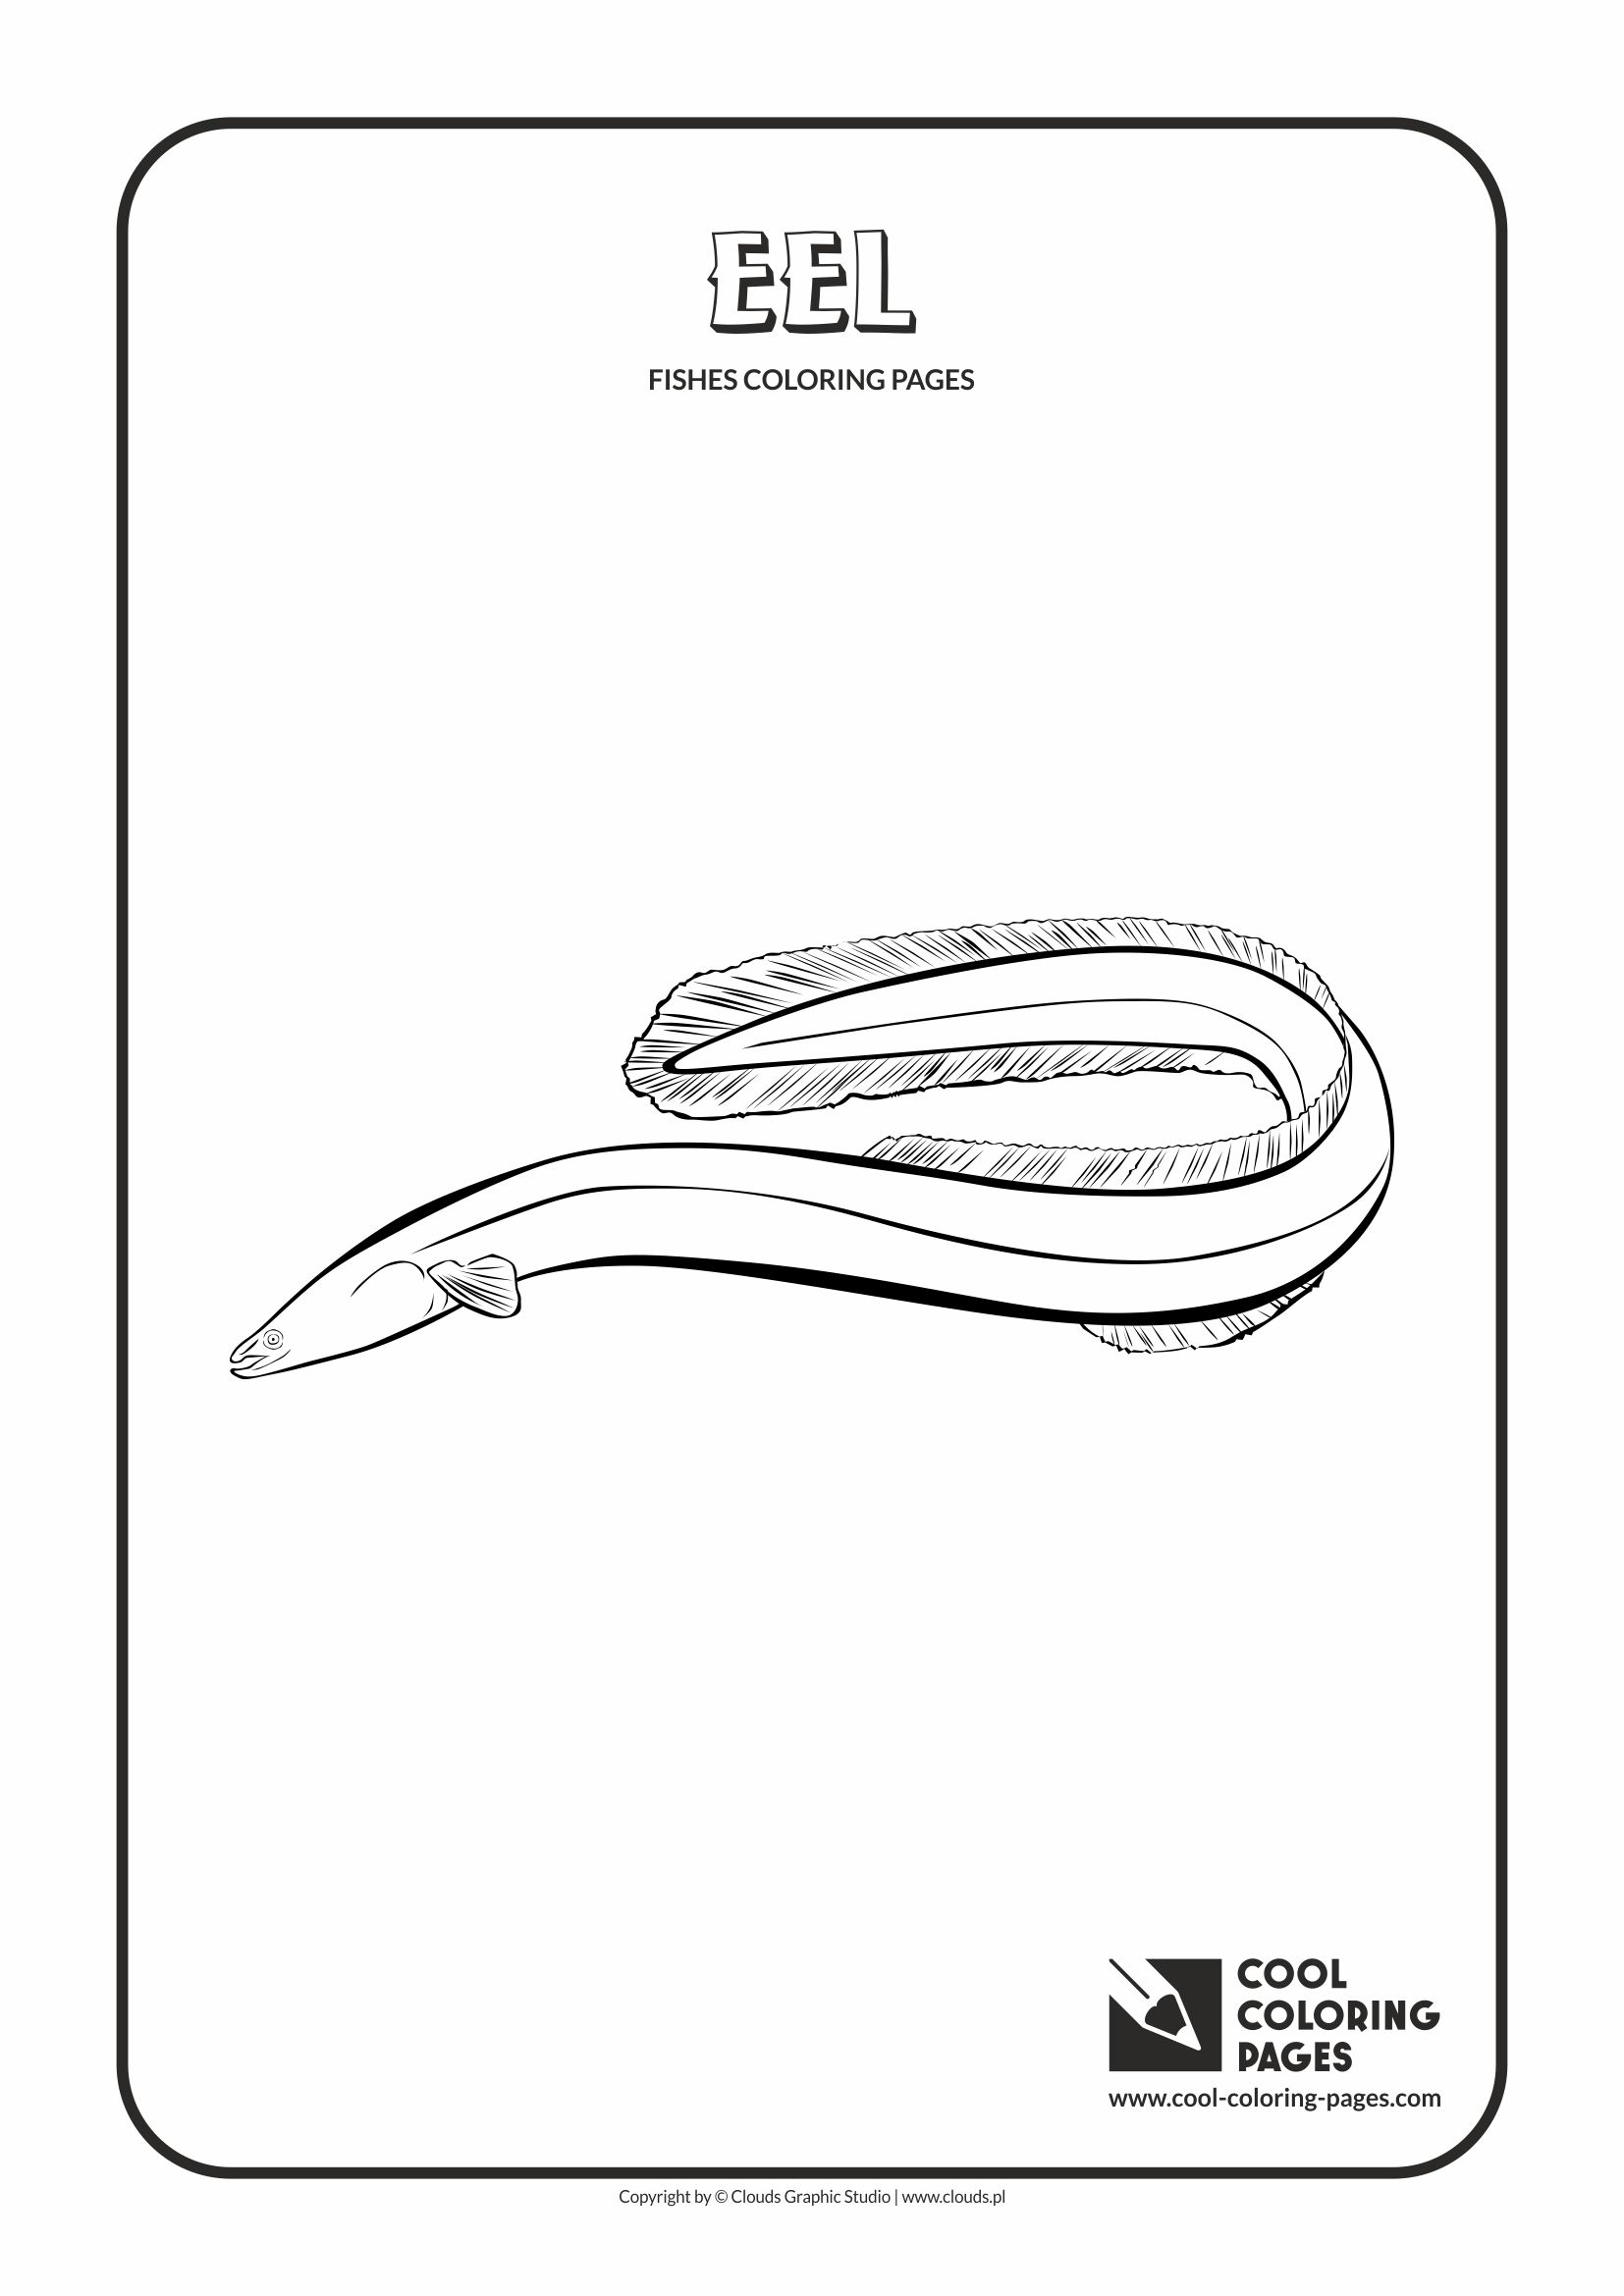 Cool Coloring Pages - Animals / Eel / Coloring page with eel